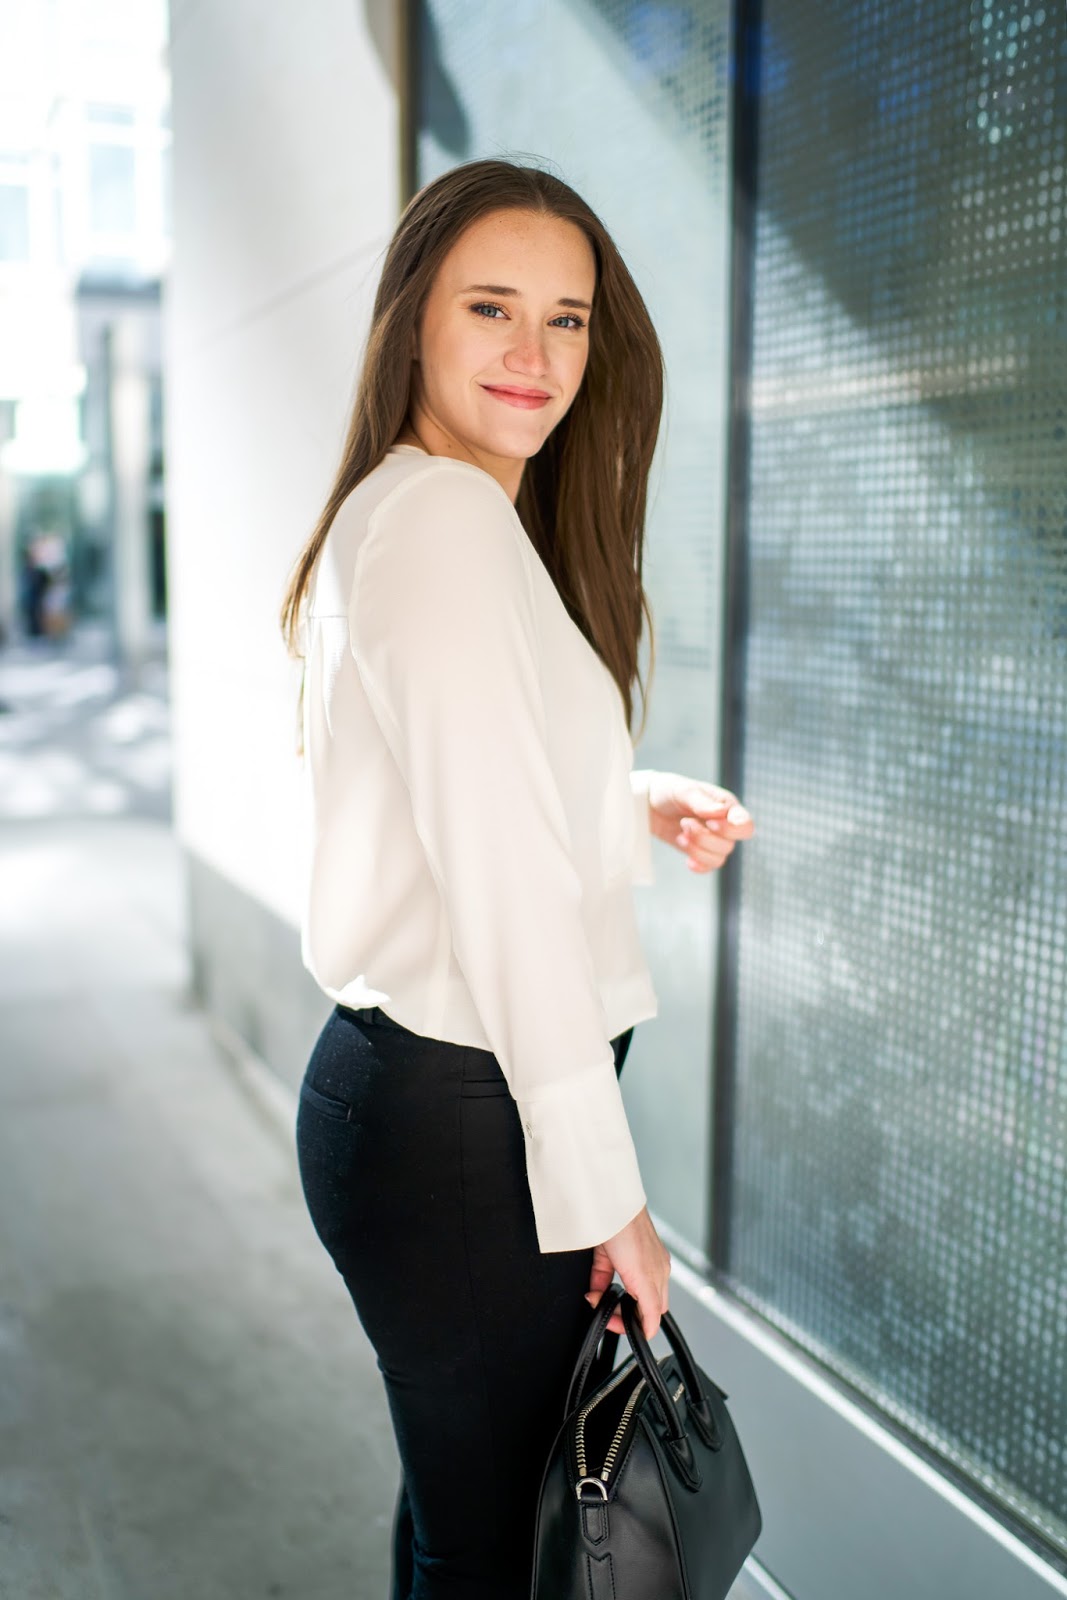 The Best White Blouse for Work by popular New York fashion blogger Covering the Bases